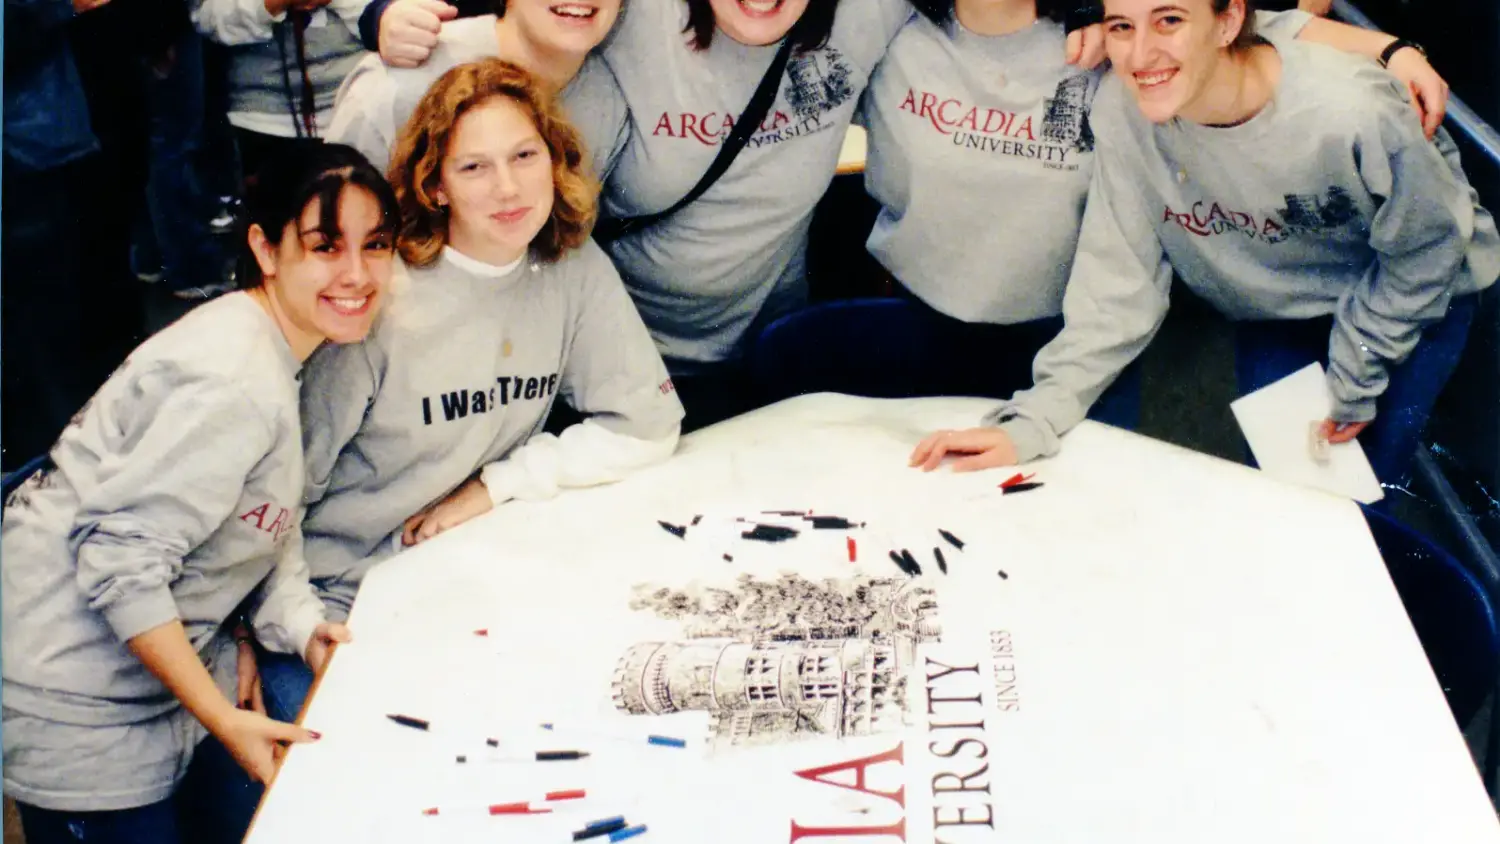 On July 16, 2001, Beaver College becomes Arcadia University. In November of the previous academic year, the name change was announced to students at a midnight celebration.